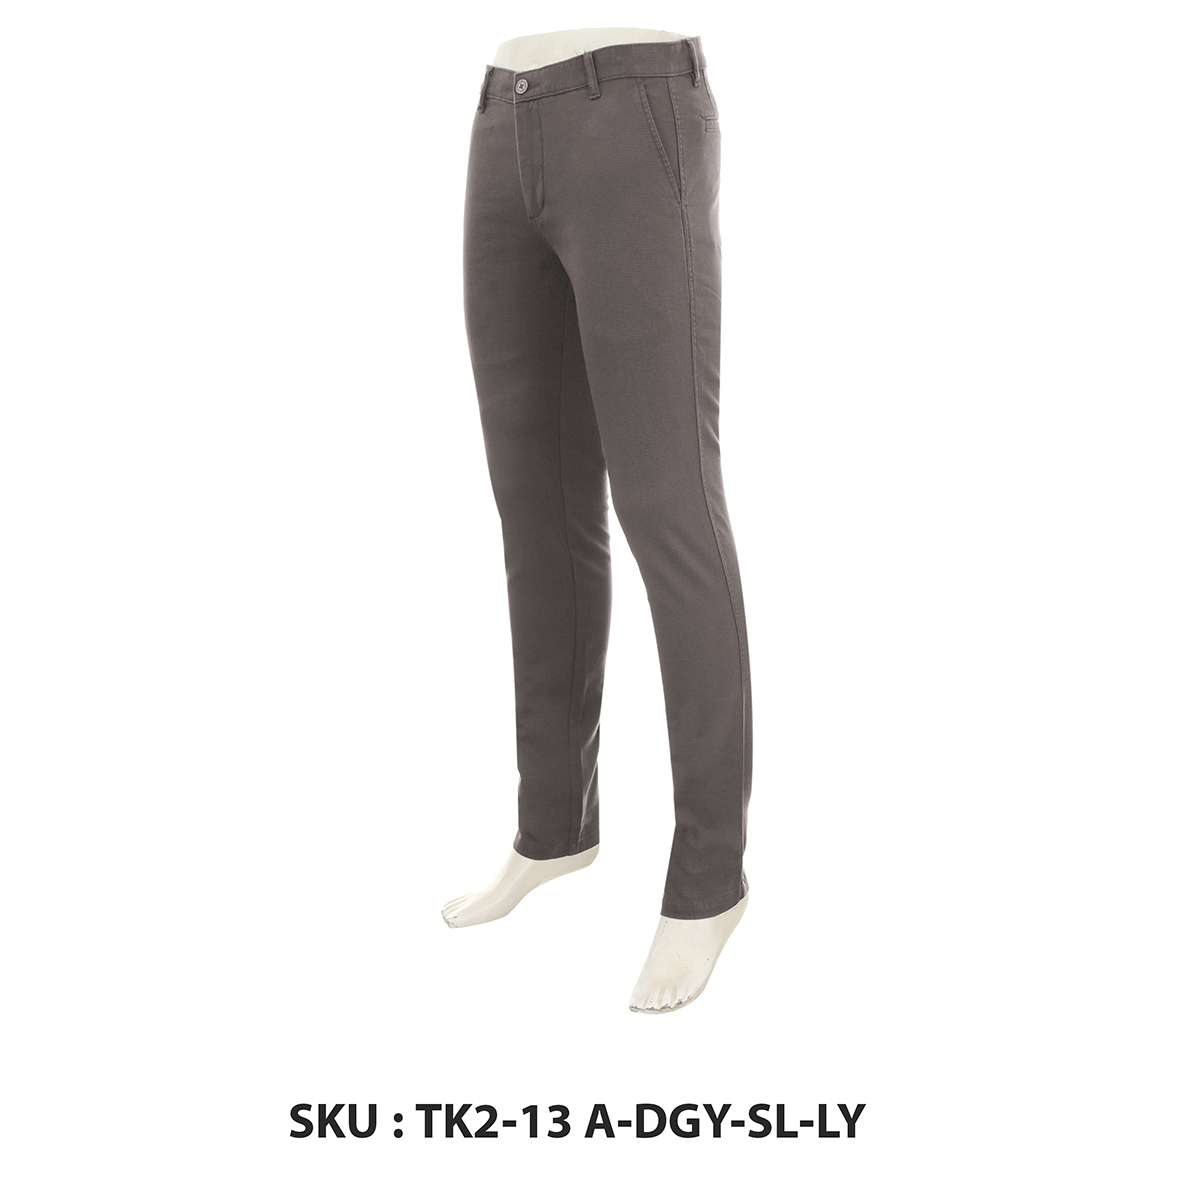 Classic Polo Mens Trousers Tk2-13 A-Dgy-Sl-Ly Grey 30